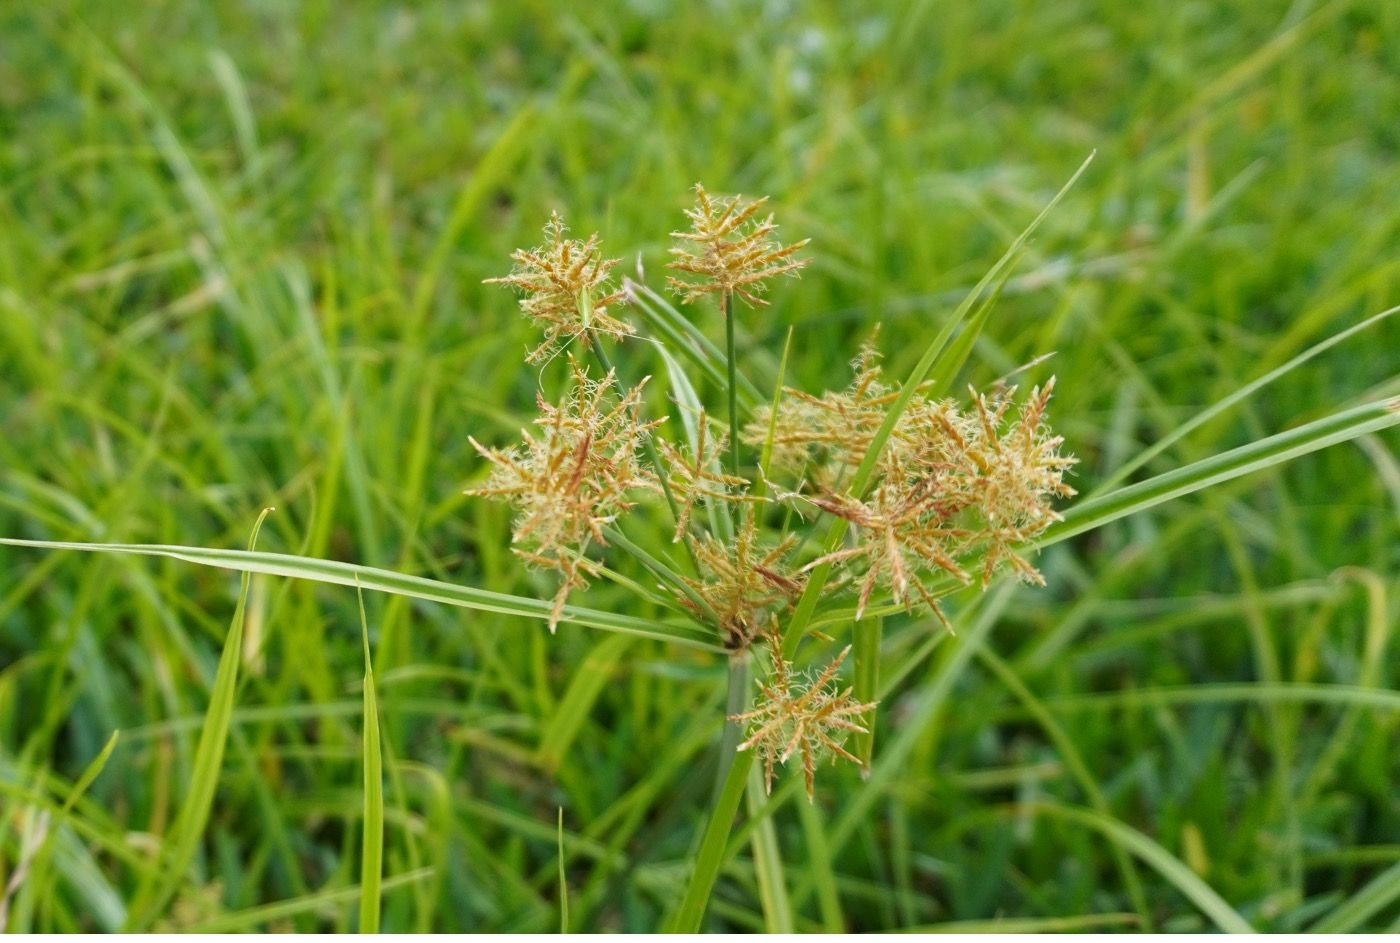 An example of a sedge weed – yellow nutsedge inflorescence in north-central Florida.